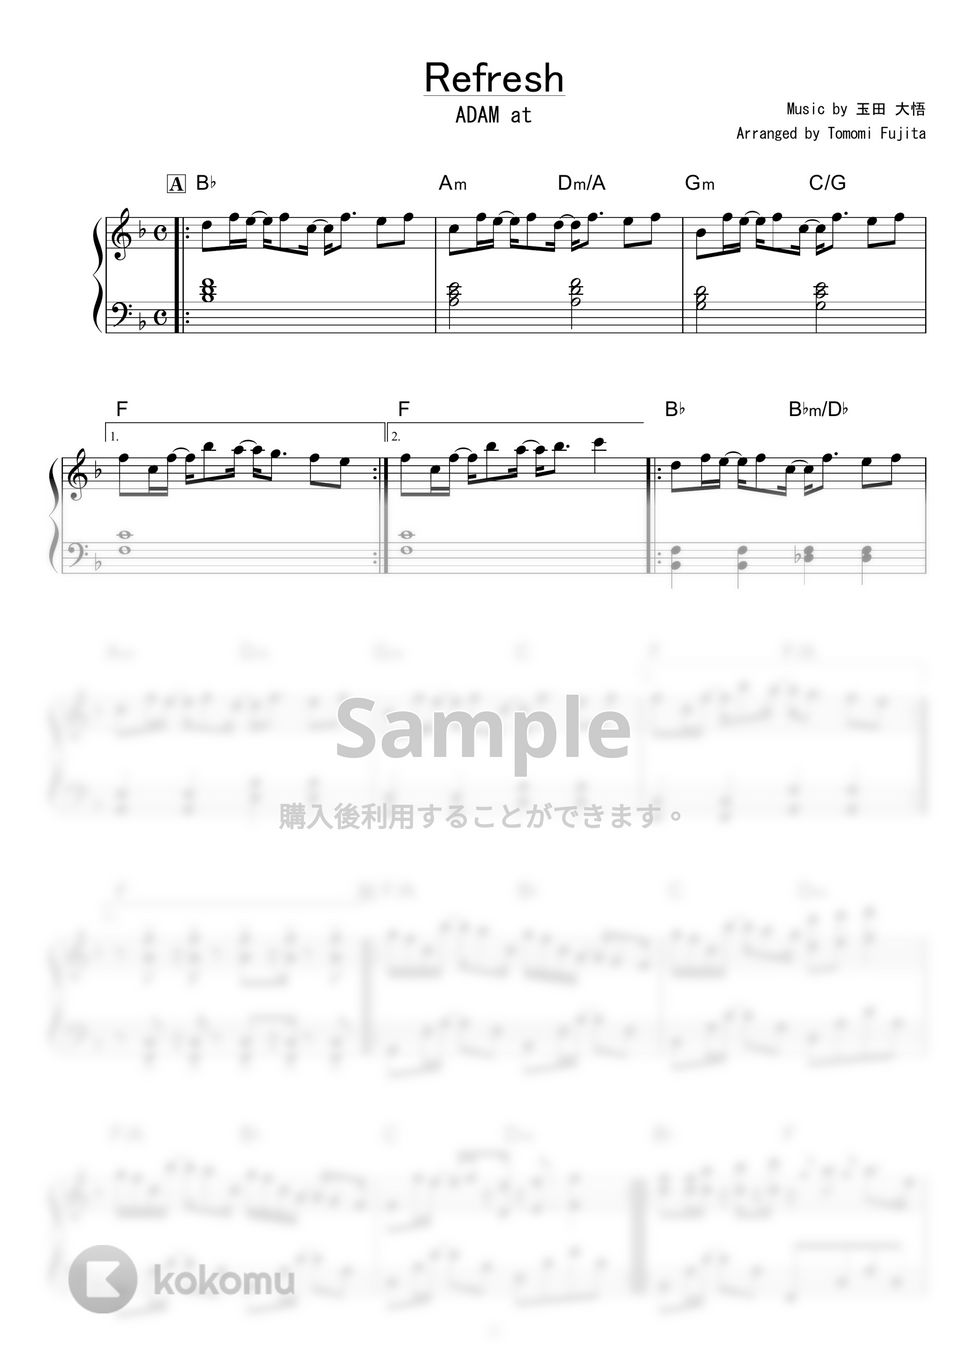 ADAM at - Refresh by piano*score